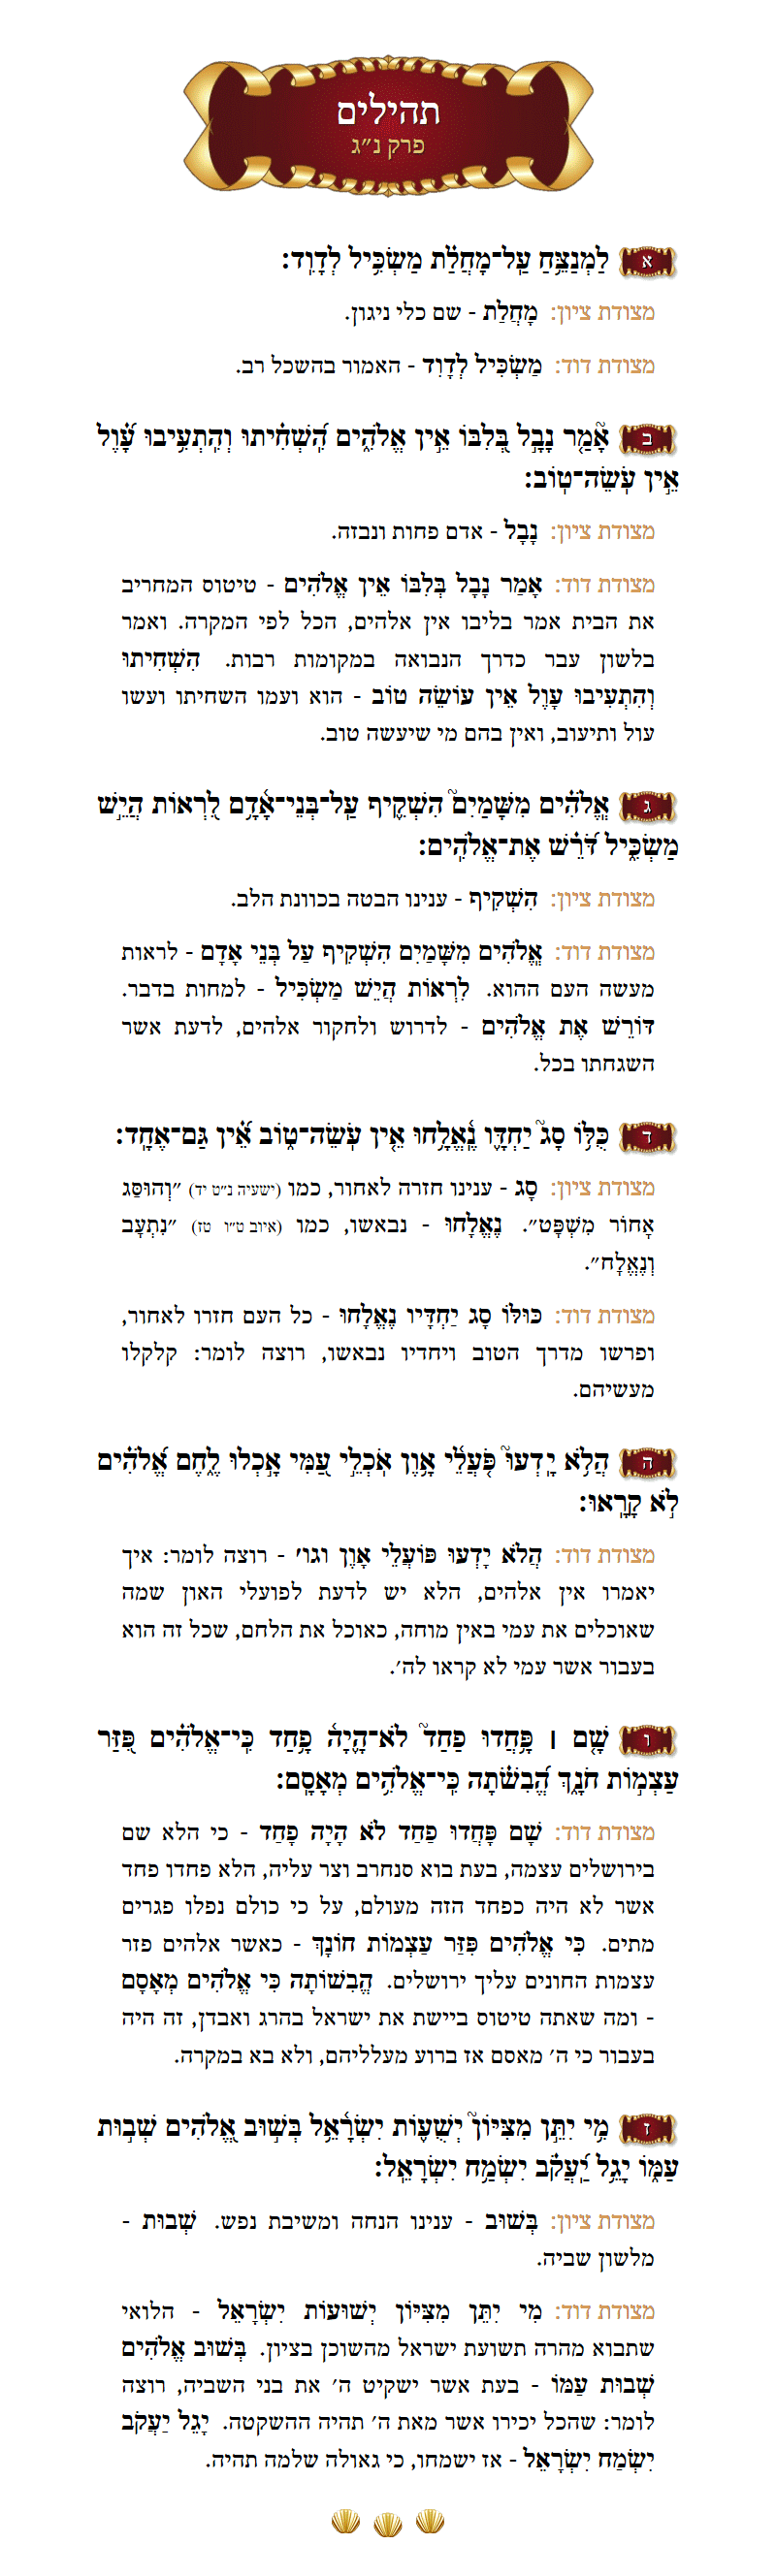 Sefer Tehillim Chapter 53 with commentary